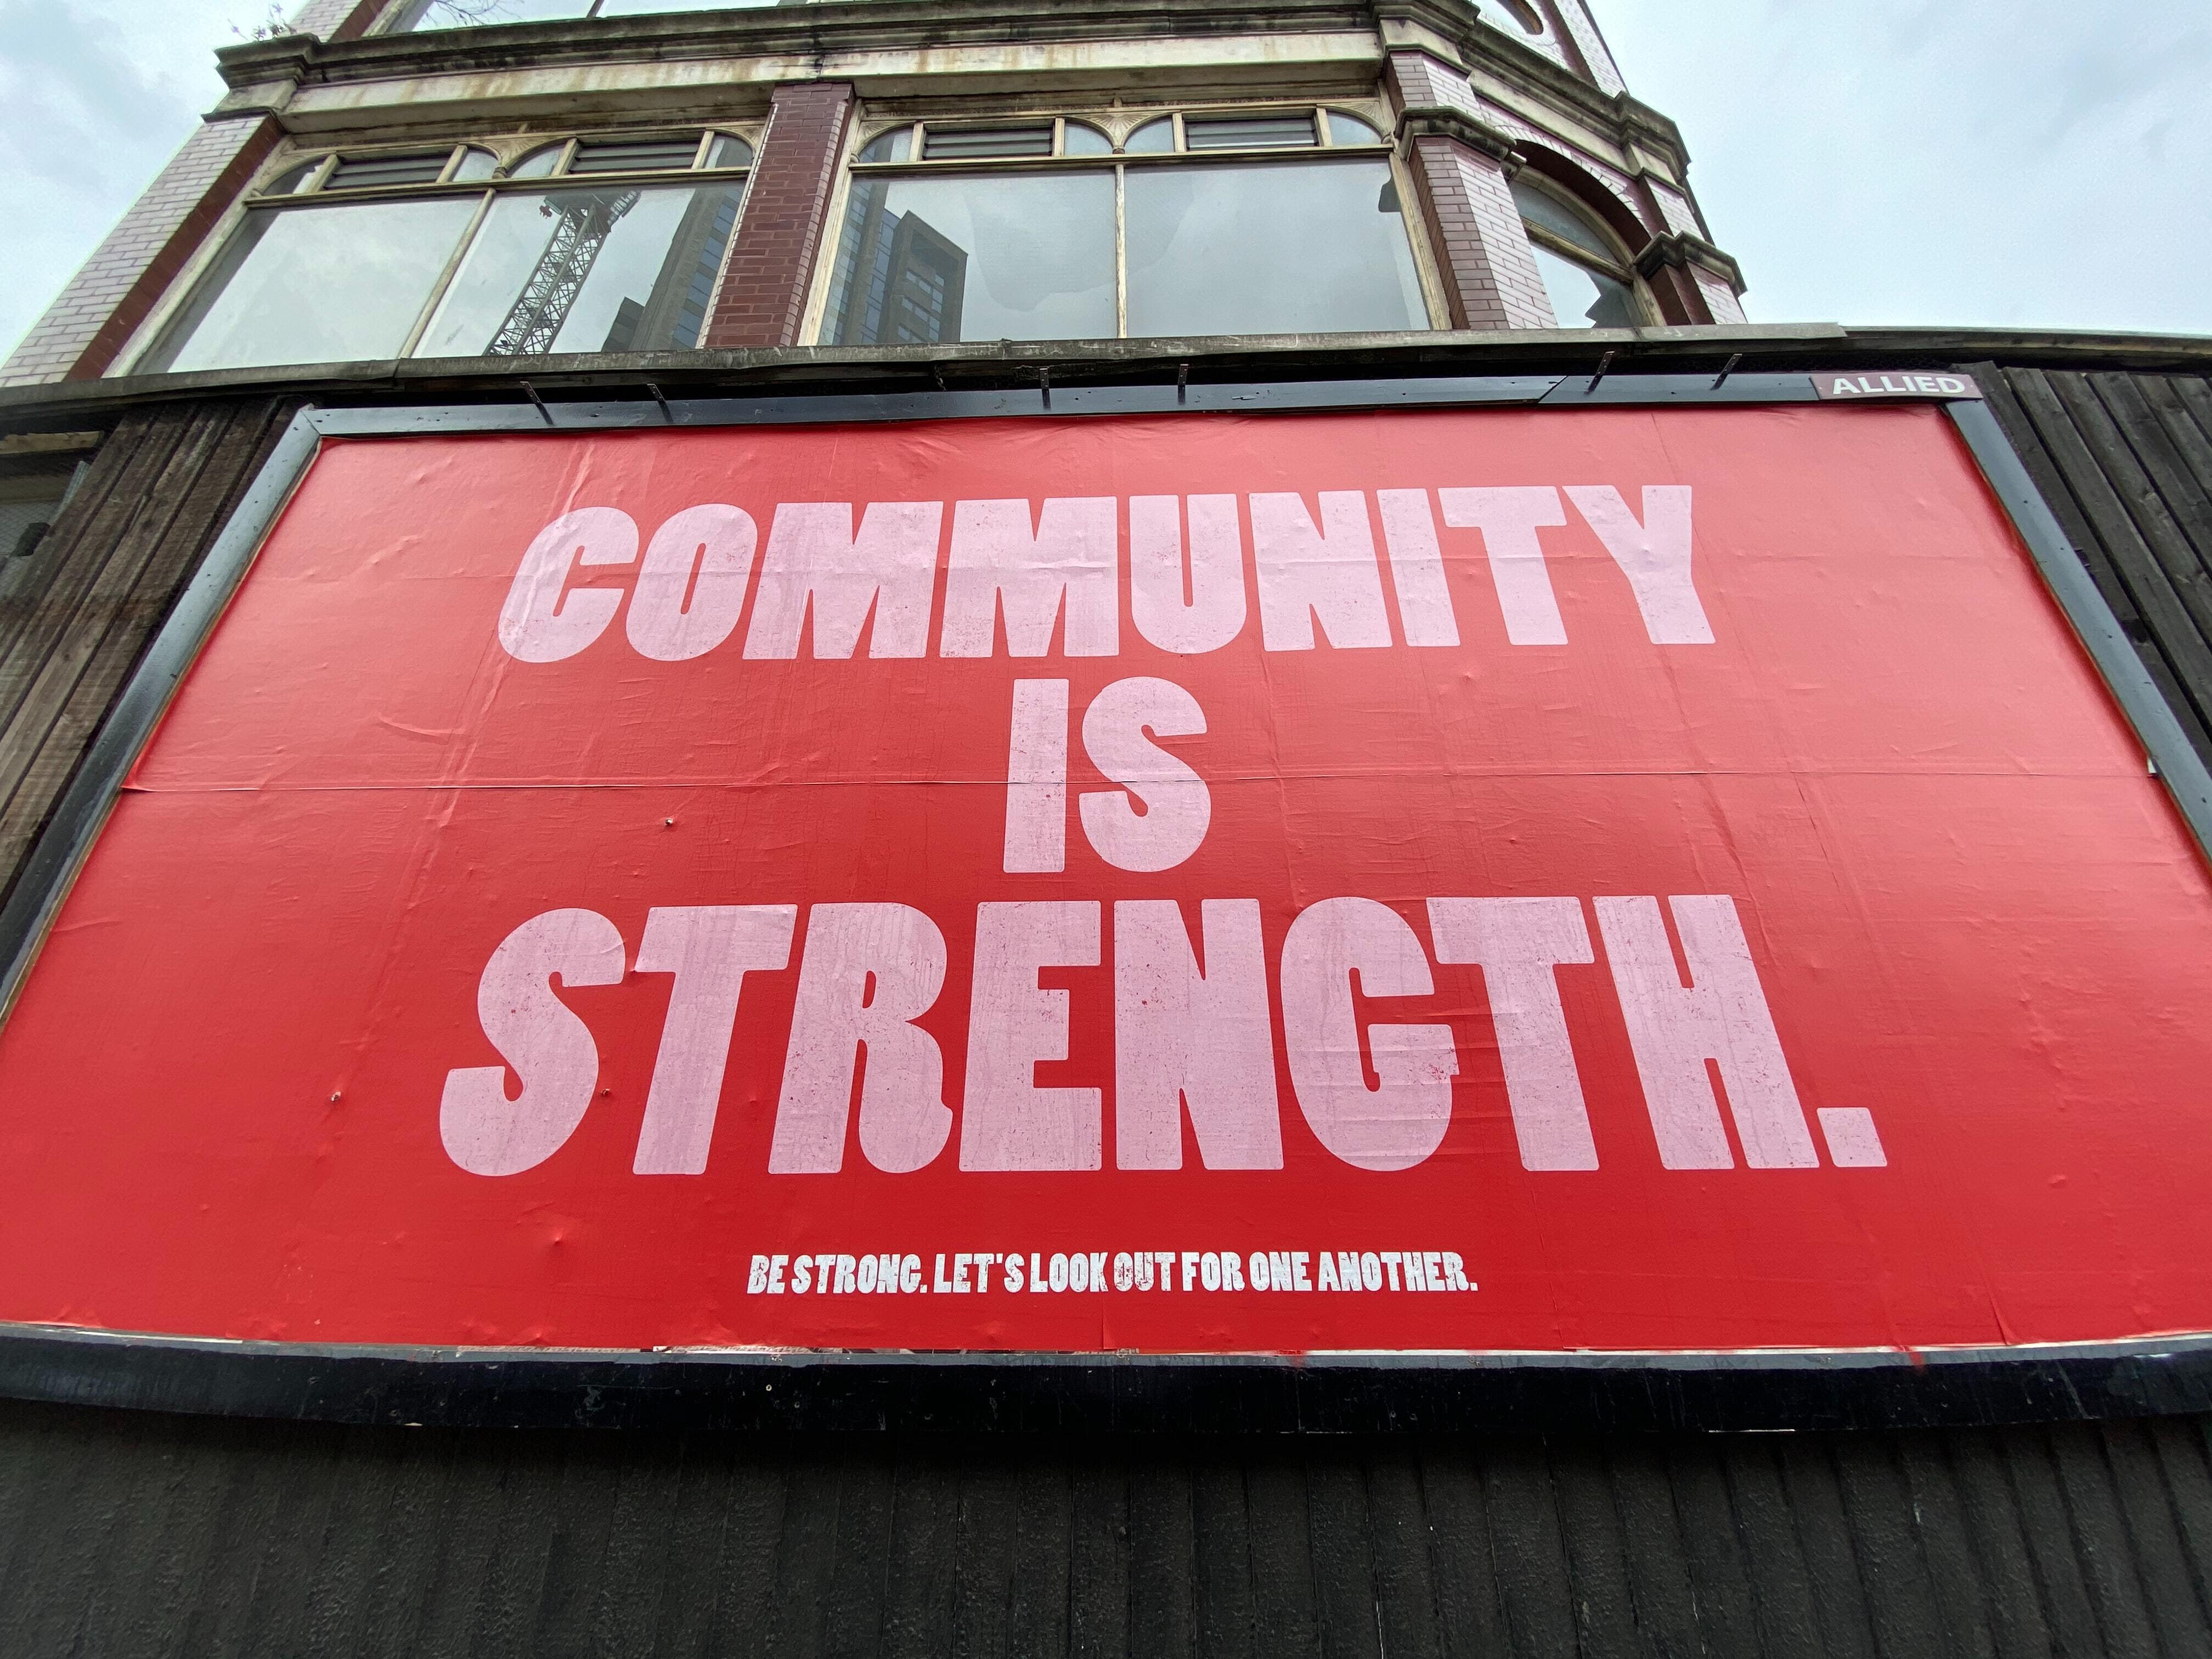 Red billboard with the words "community is strength" written on it.